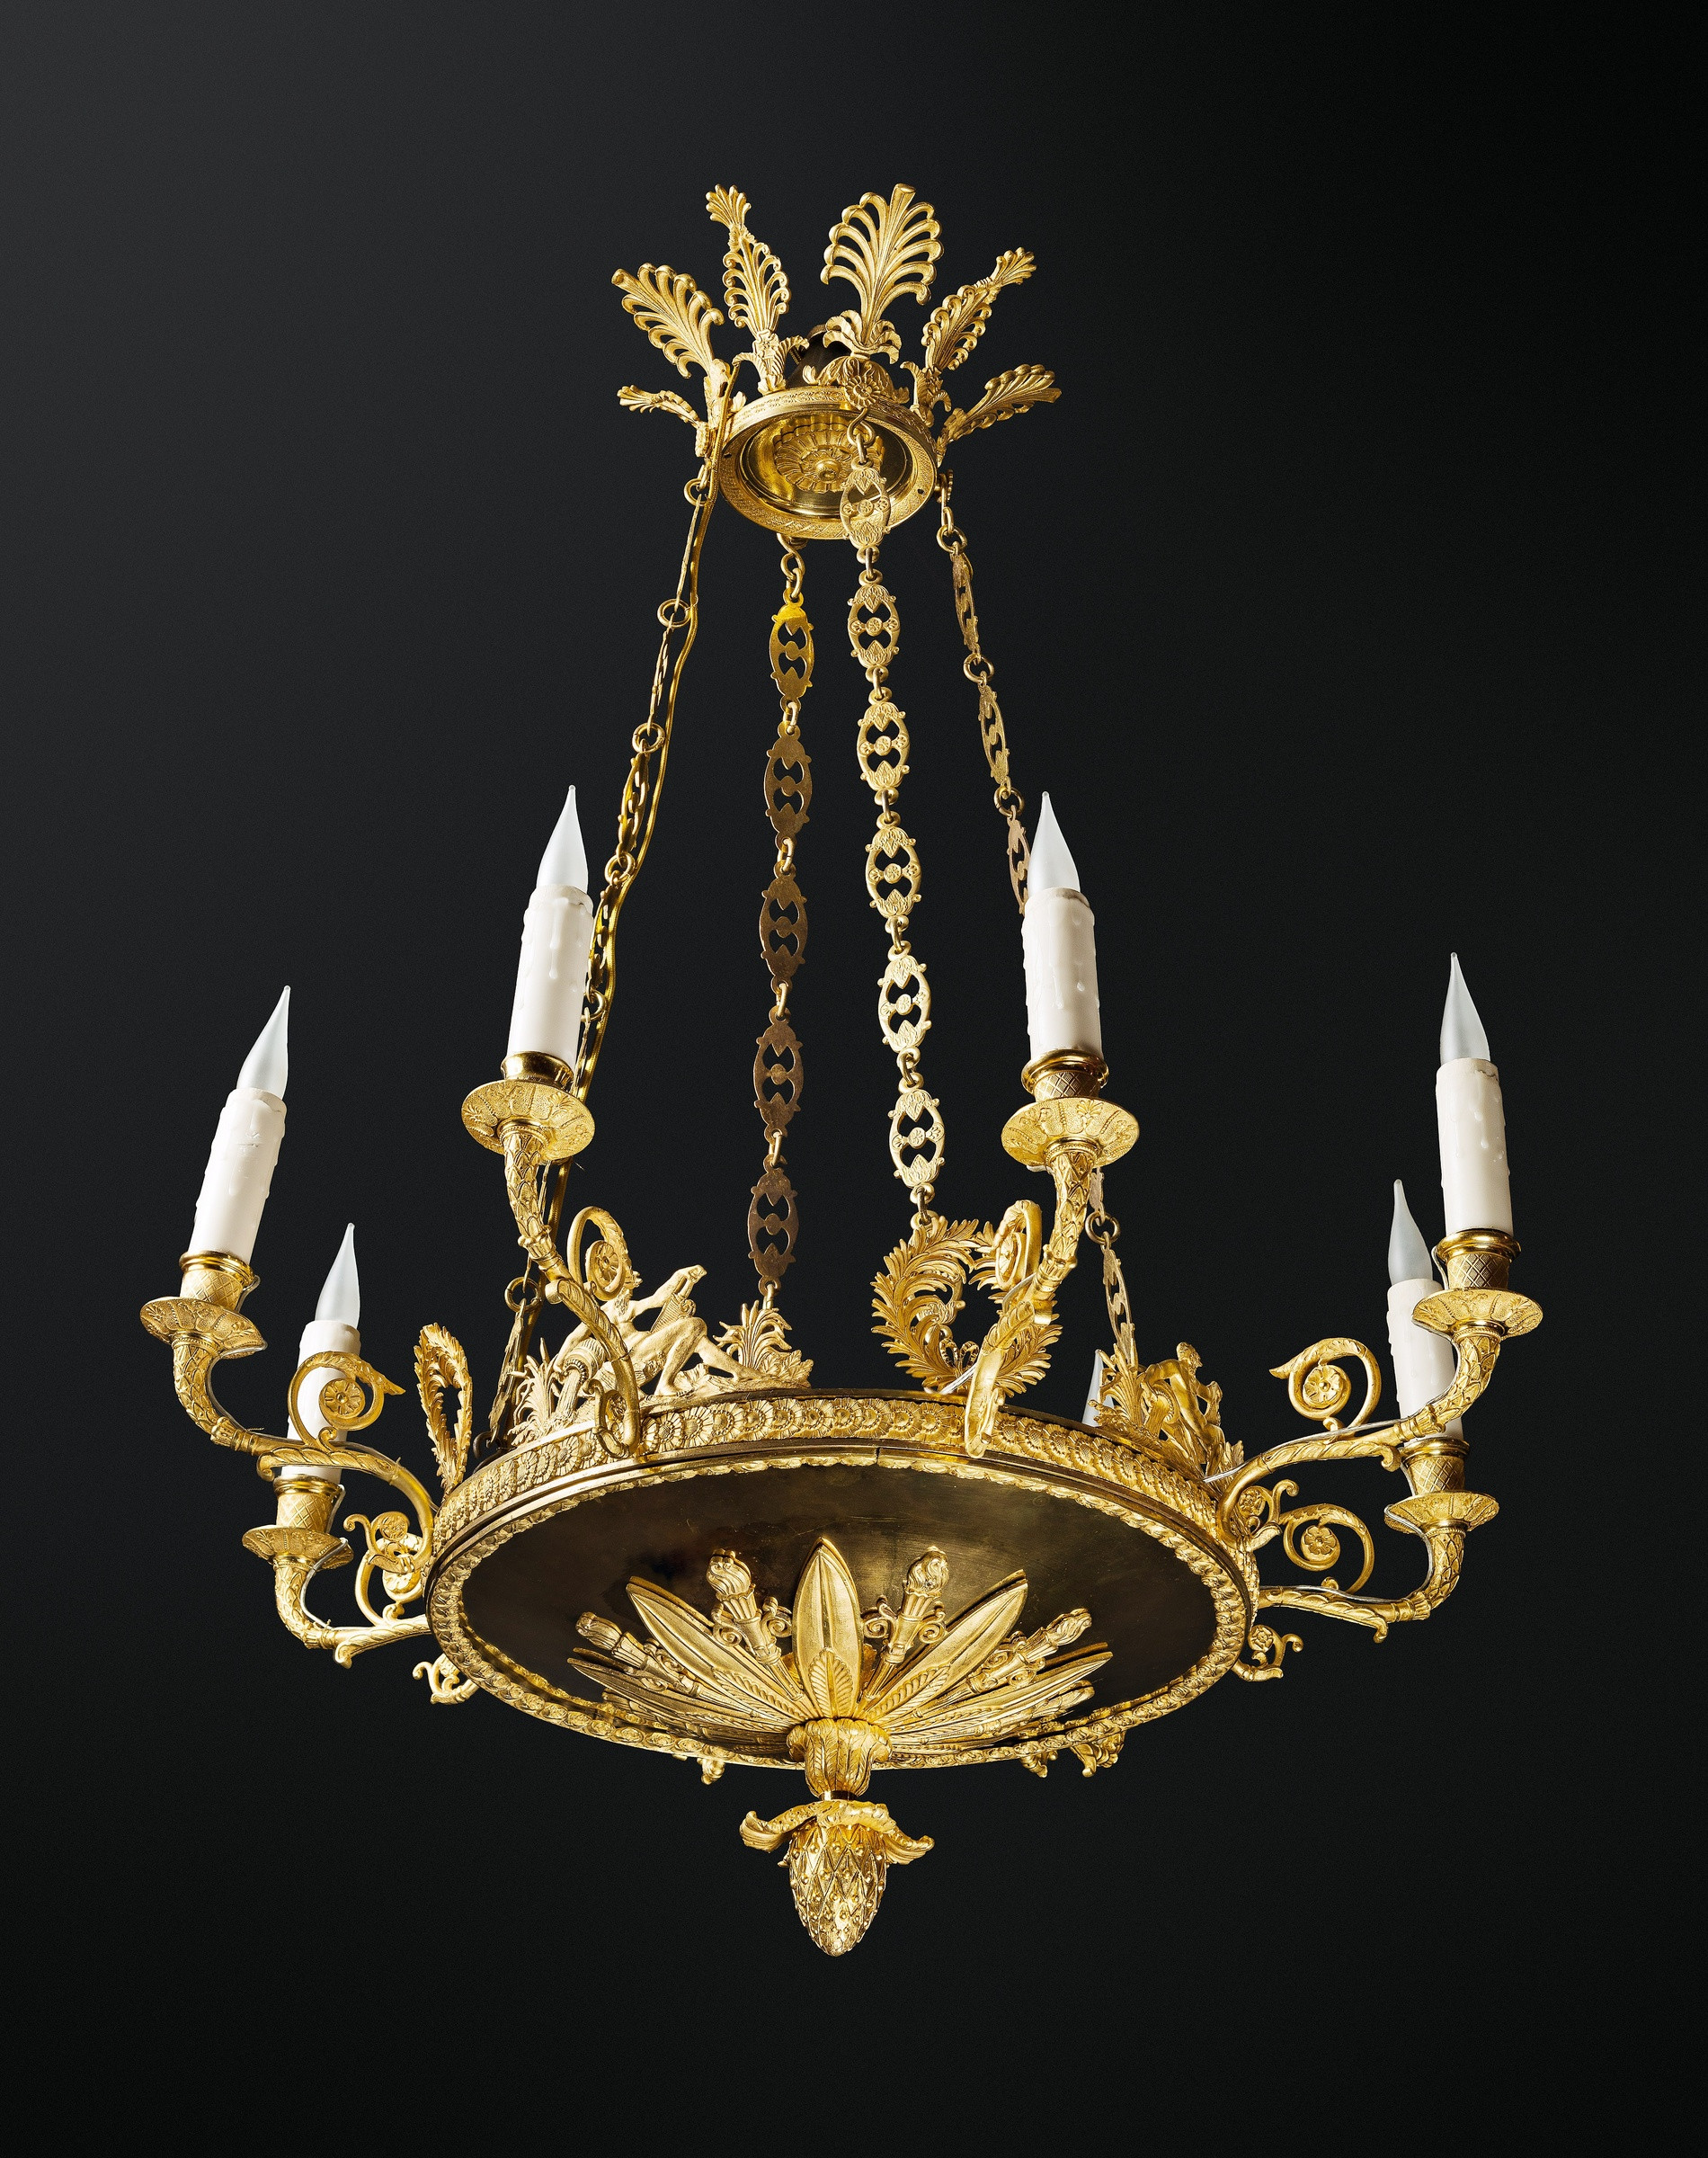 24 Amazing Vase Chandelier Frame 2022 free download vase chandelier frame of andrei schreiber attributed to a russian empire eight light with regard to a russian empire eight light chandelier attributed to the bronzier andrei schreiber